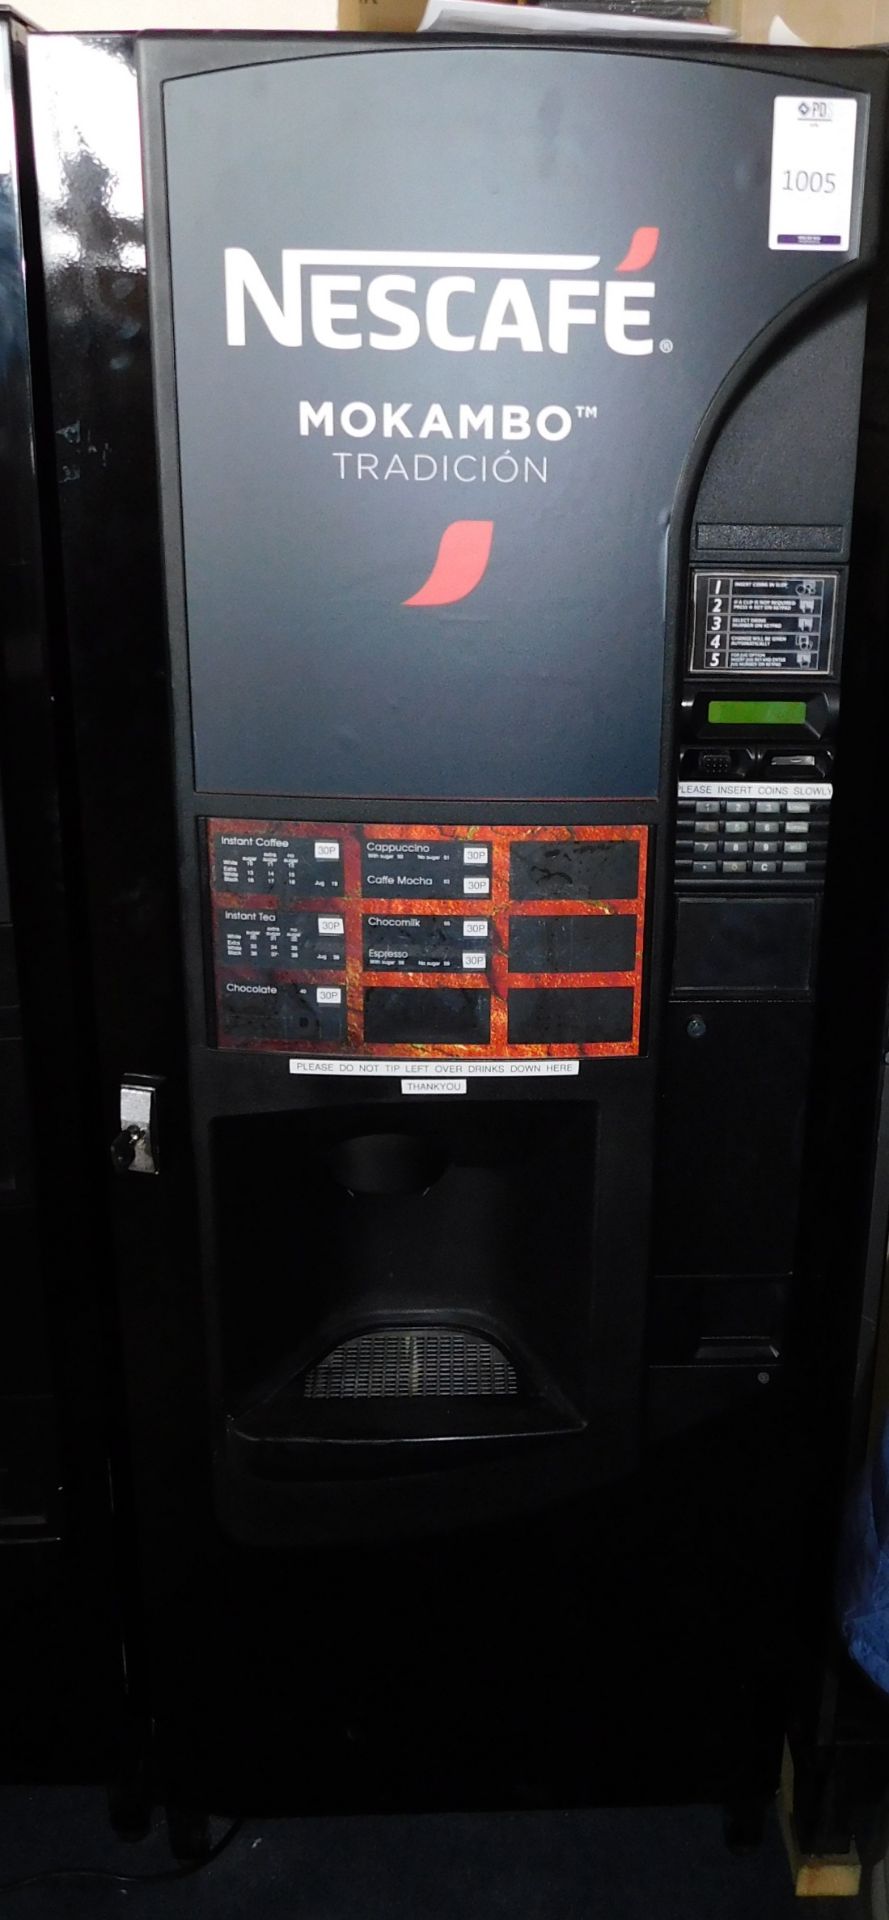 Coffee Vending Machine (Location Stockport. Please Refer to General Notes)